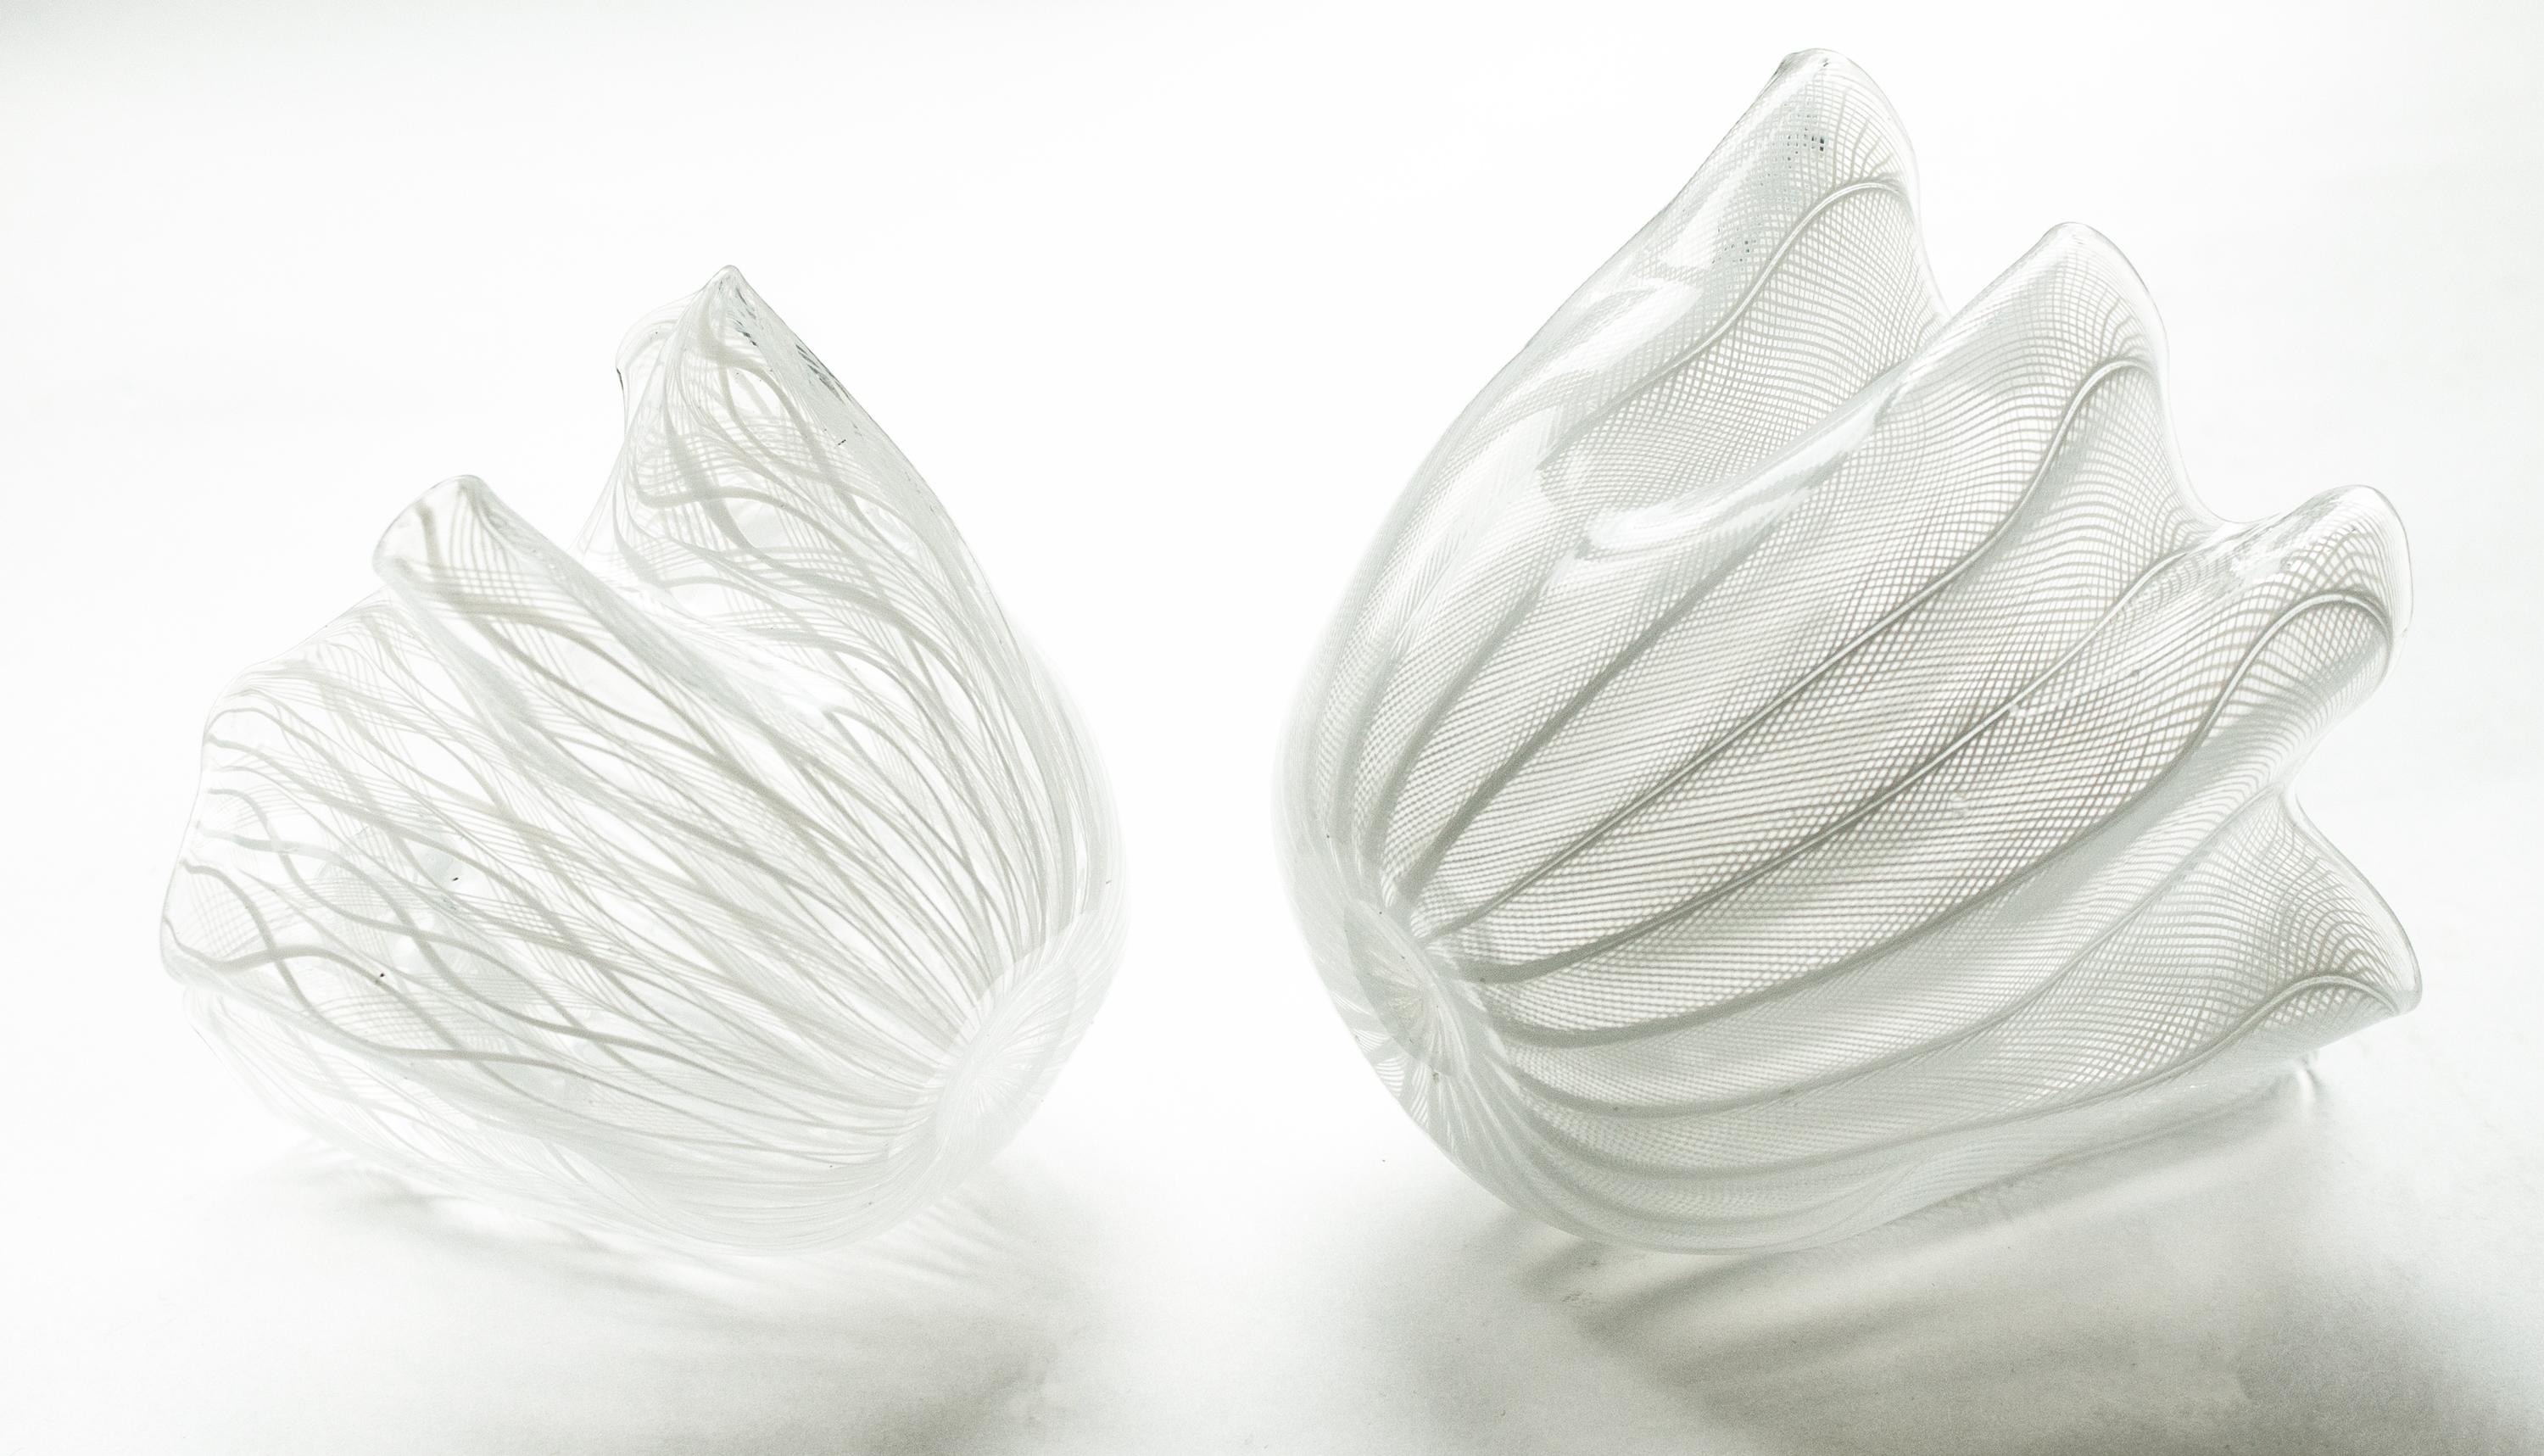 Three Murano Handkerchief Vases/Bowls crafted in Murano, Italy, known for its exceptional glass artistry, are now available. These hand-blown pieces showcase a captivating design featuring delicate white Zanfirico ribbons adorned with pink and white